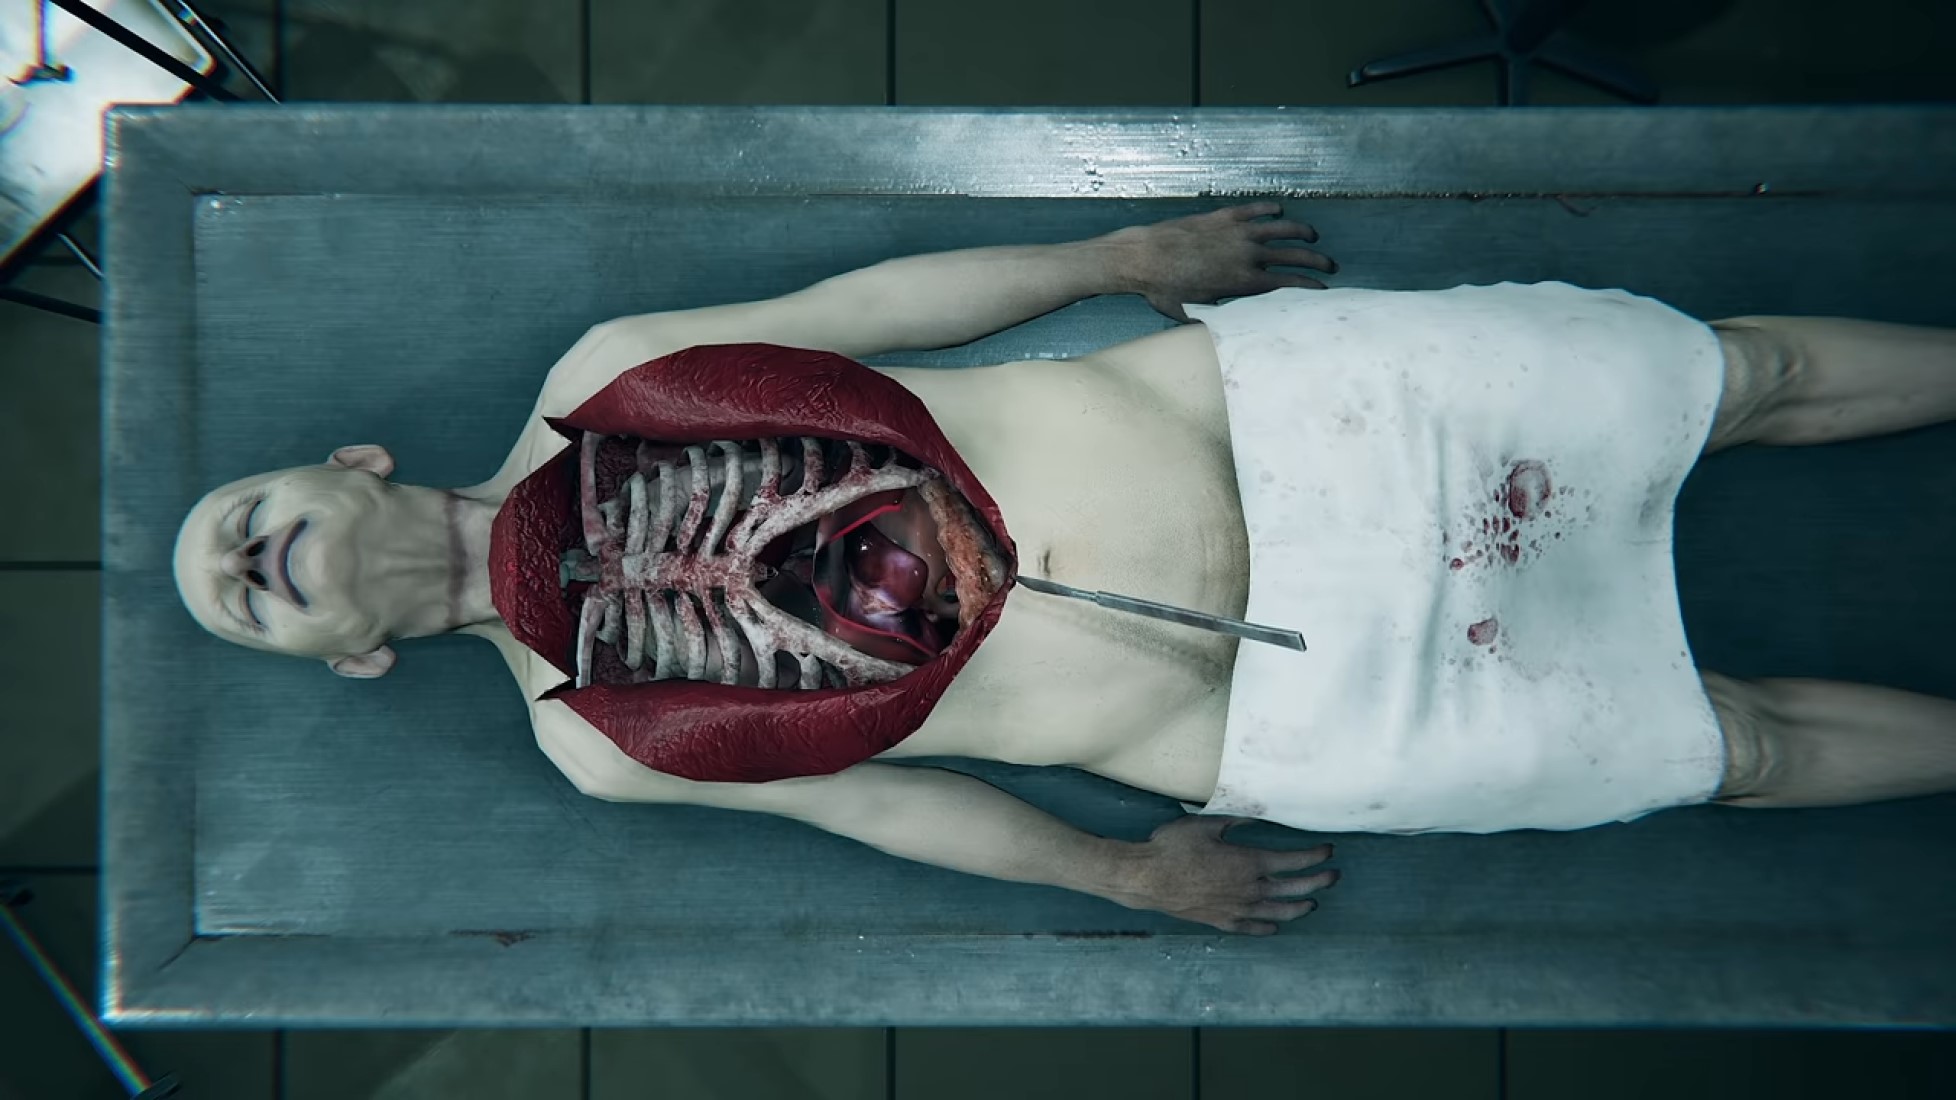 Autopsy Simulator Trailer Shows That Simulations Can Be Scary and Cool Too....